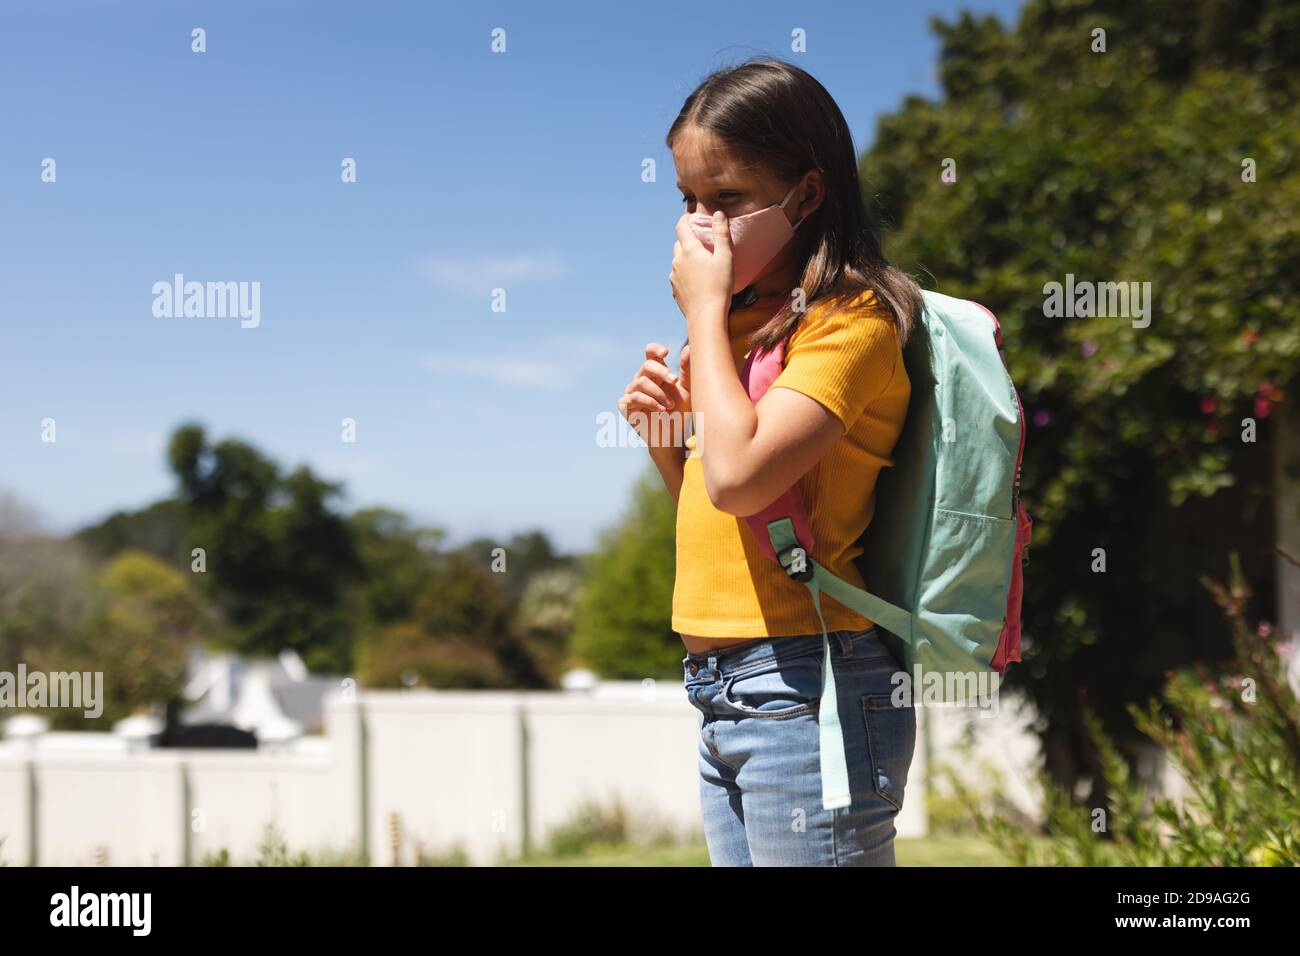 Caucasian girl with dark hair wearing face mask walking to school carrying schoolbag Stock Photo